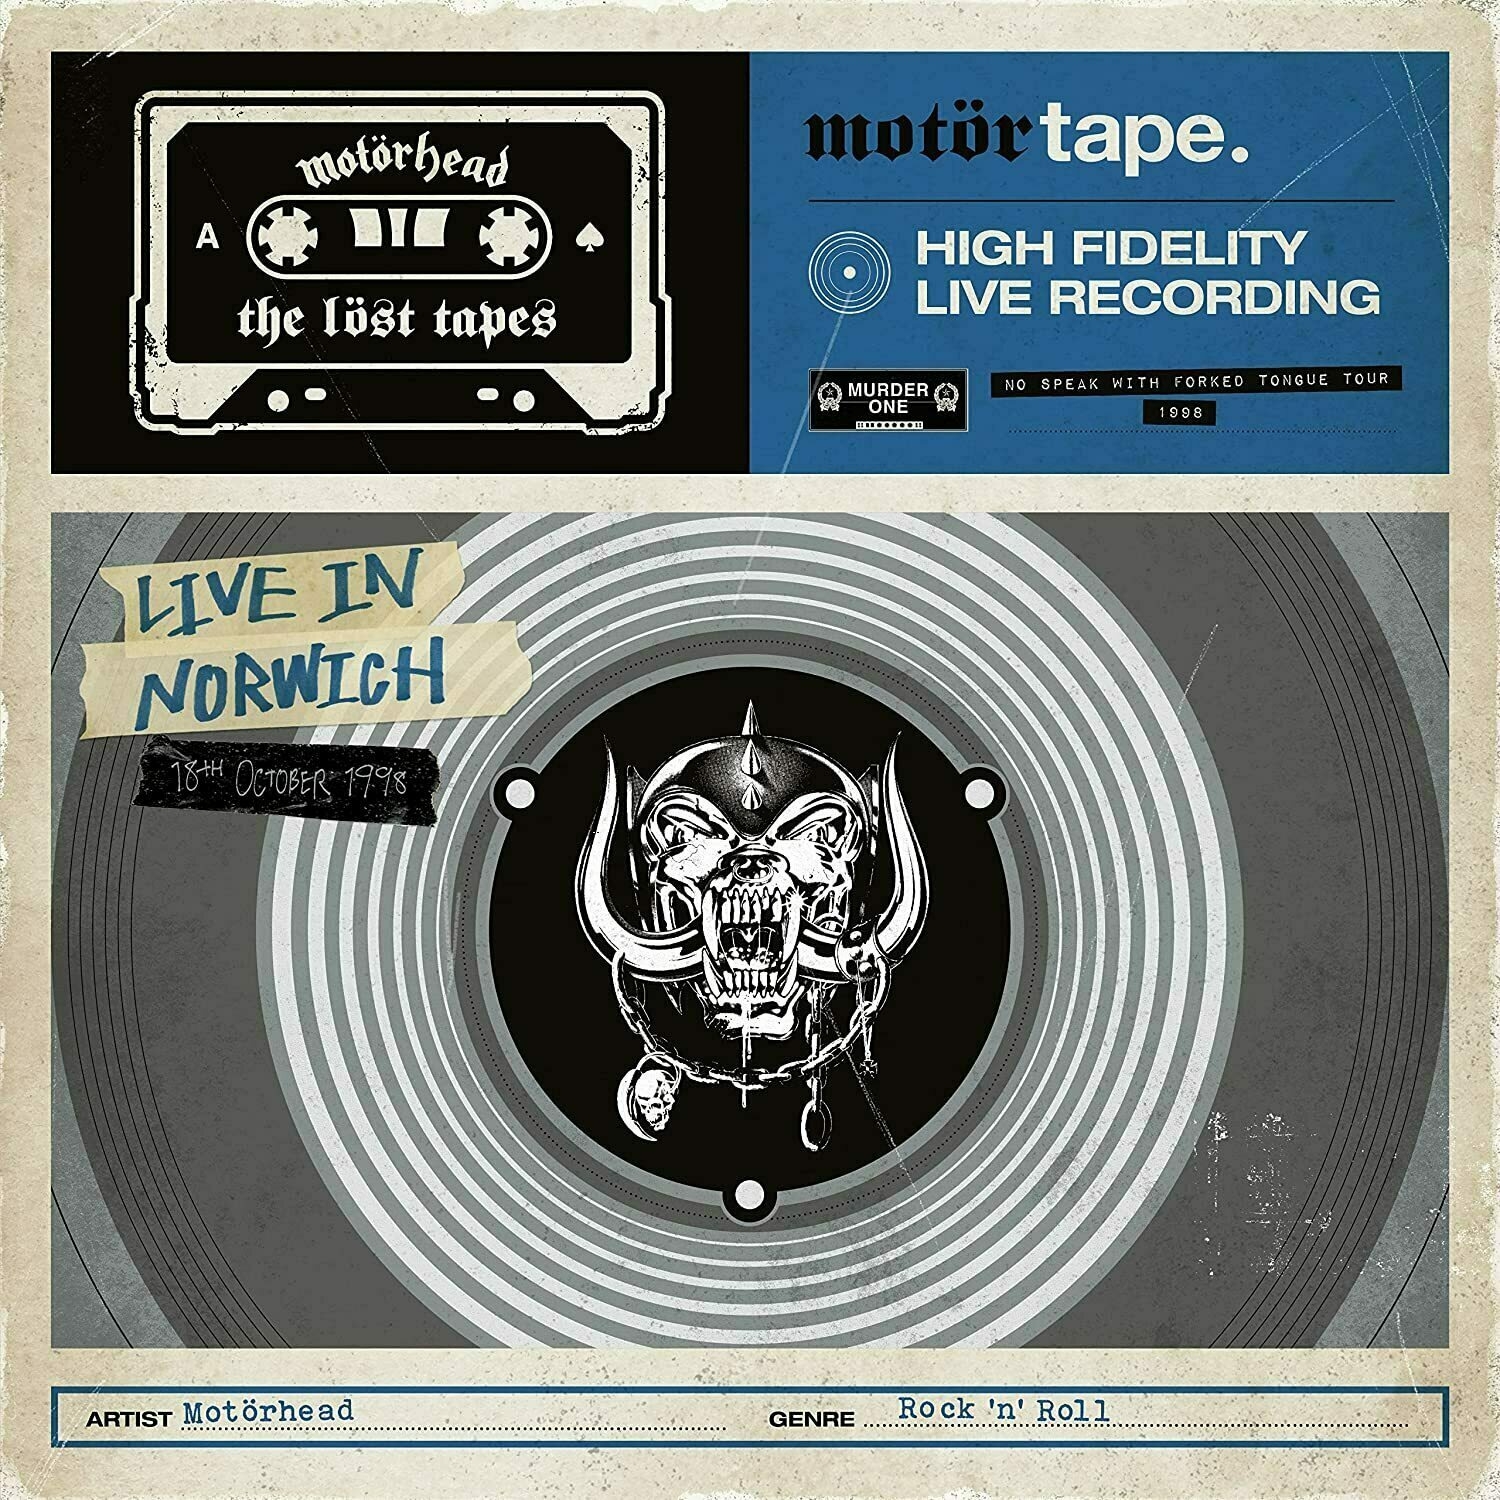 Виниловая Пластинка Motorhead The Lost Tapes Vol. 2 (Live In Norwich 1998) (4050538707762) laptop bag 13 13 3 14 15 6 15 6 16 17 3 inches for macbook air pro xiaomi lenovo dell hp notebook shoulder briefcase sleeve case